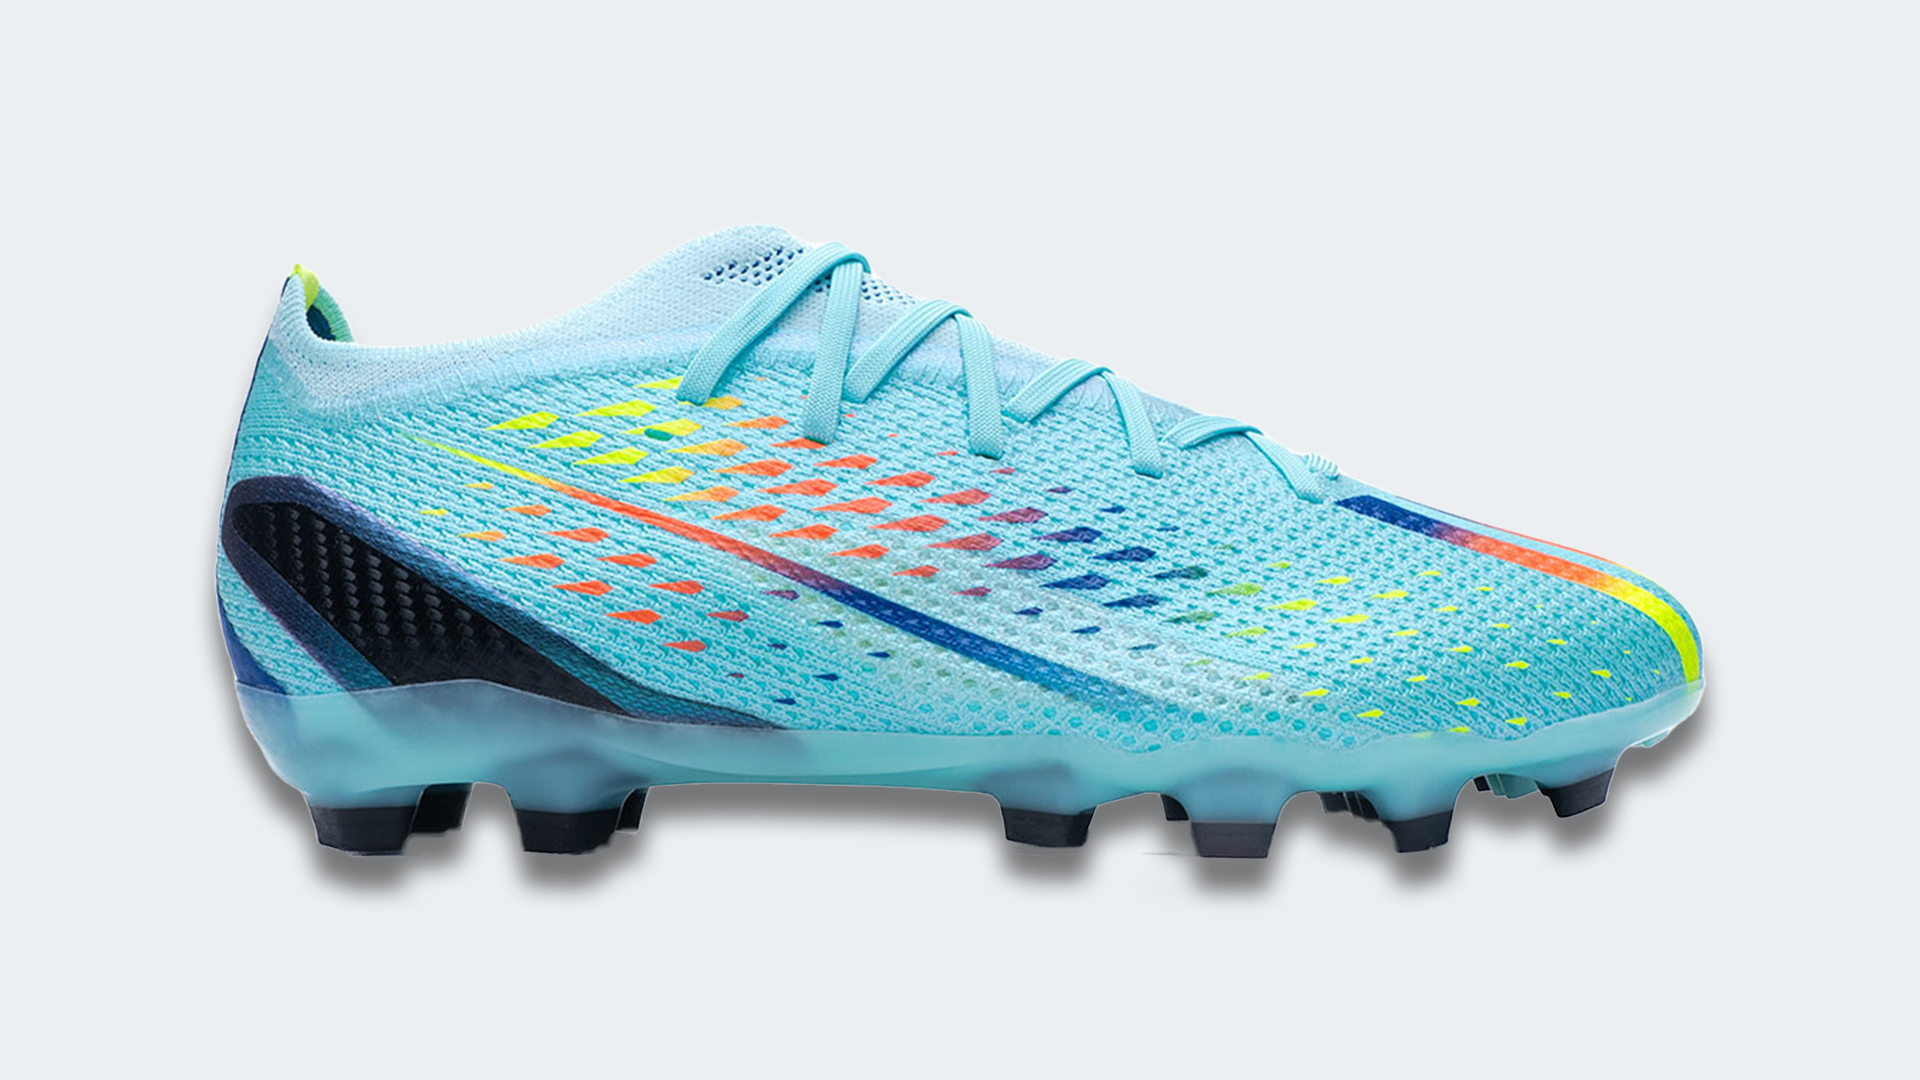 The best multi-ground football boots 